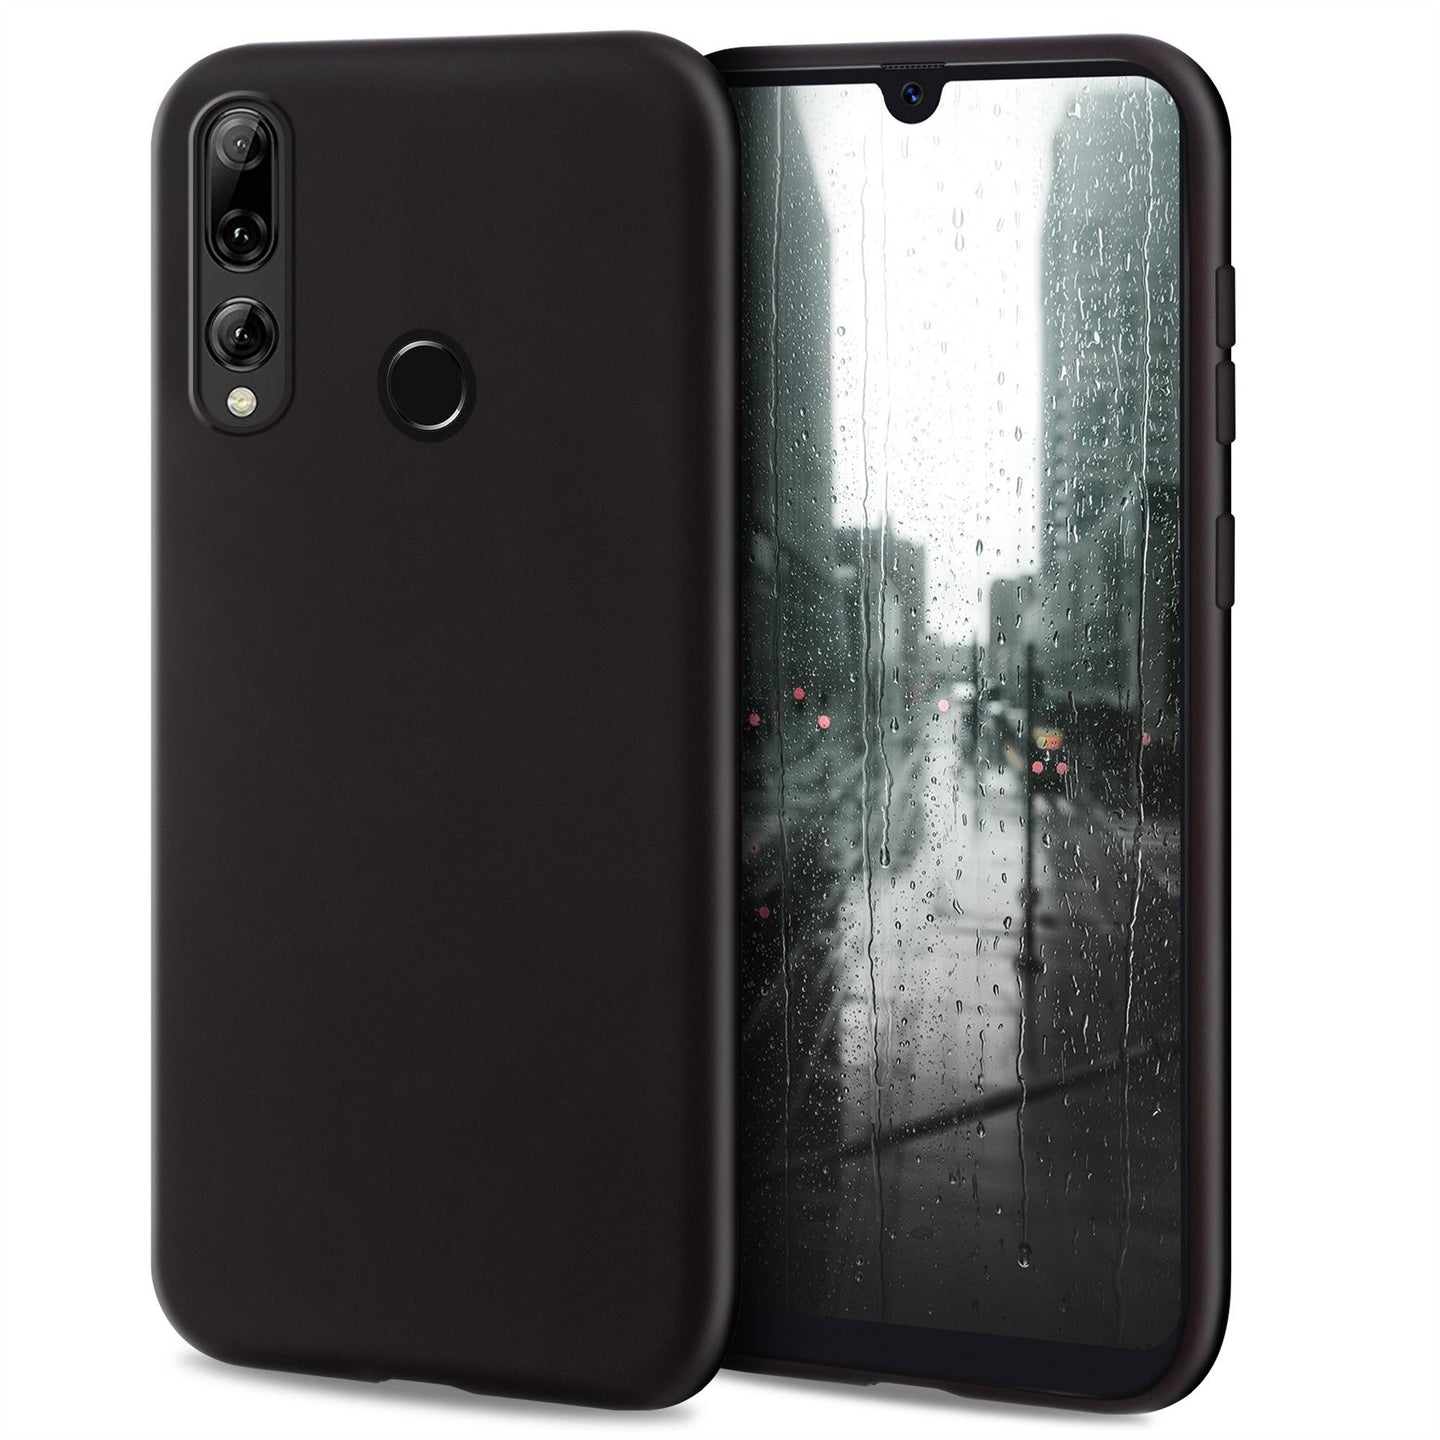 Moozy Minimalist Series Silicone Case for Huawei P Smart Plus 2019 and Honor 20 Lite, Black - Matte Finish Slim Soft TPU Cover